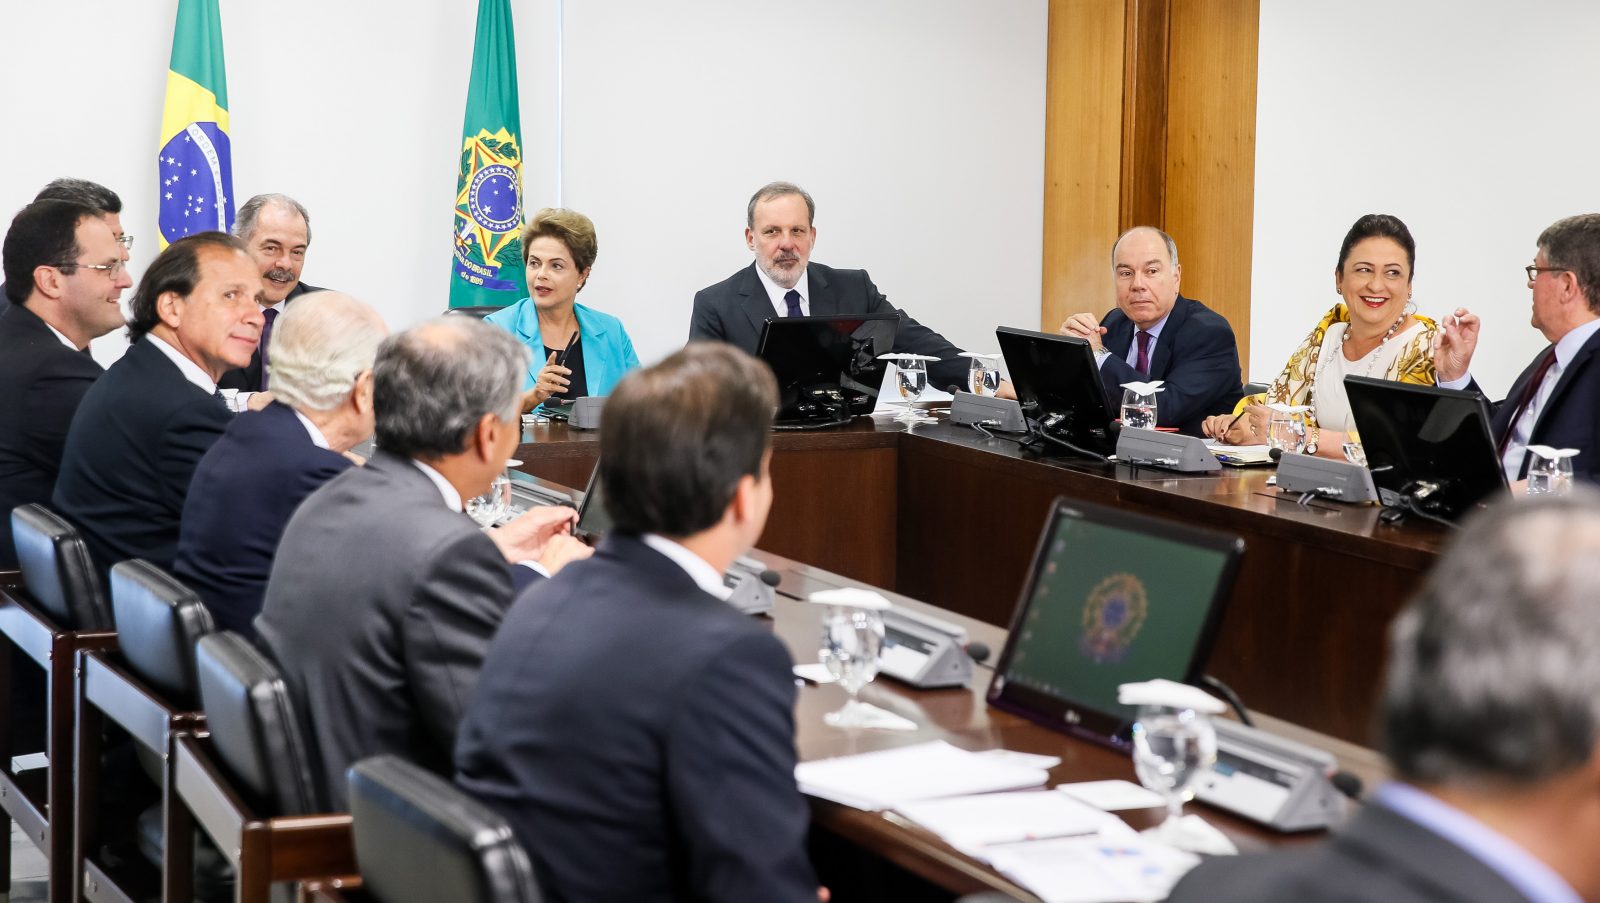 RS-Dilma-20150819-03